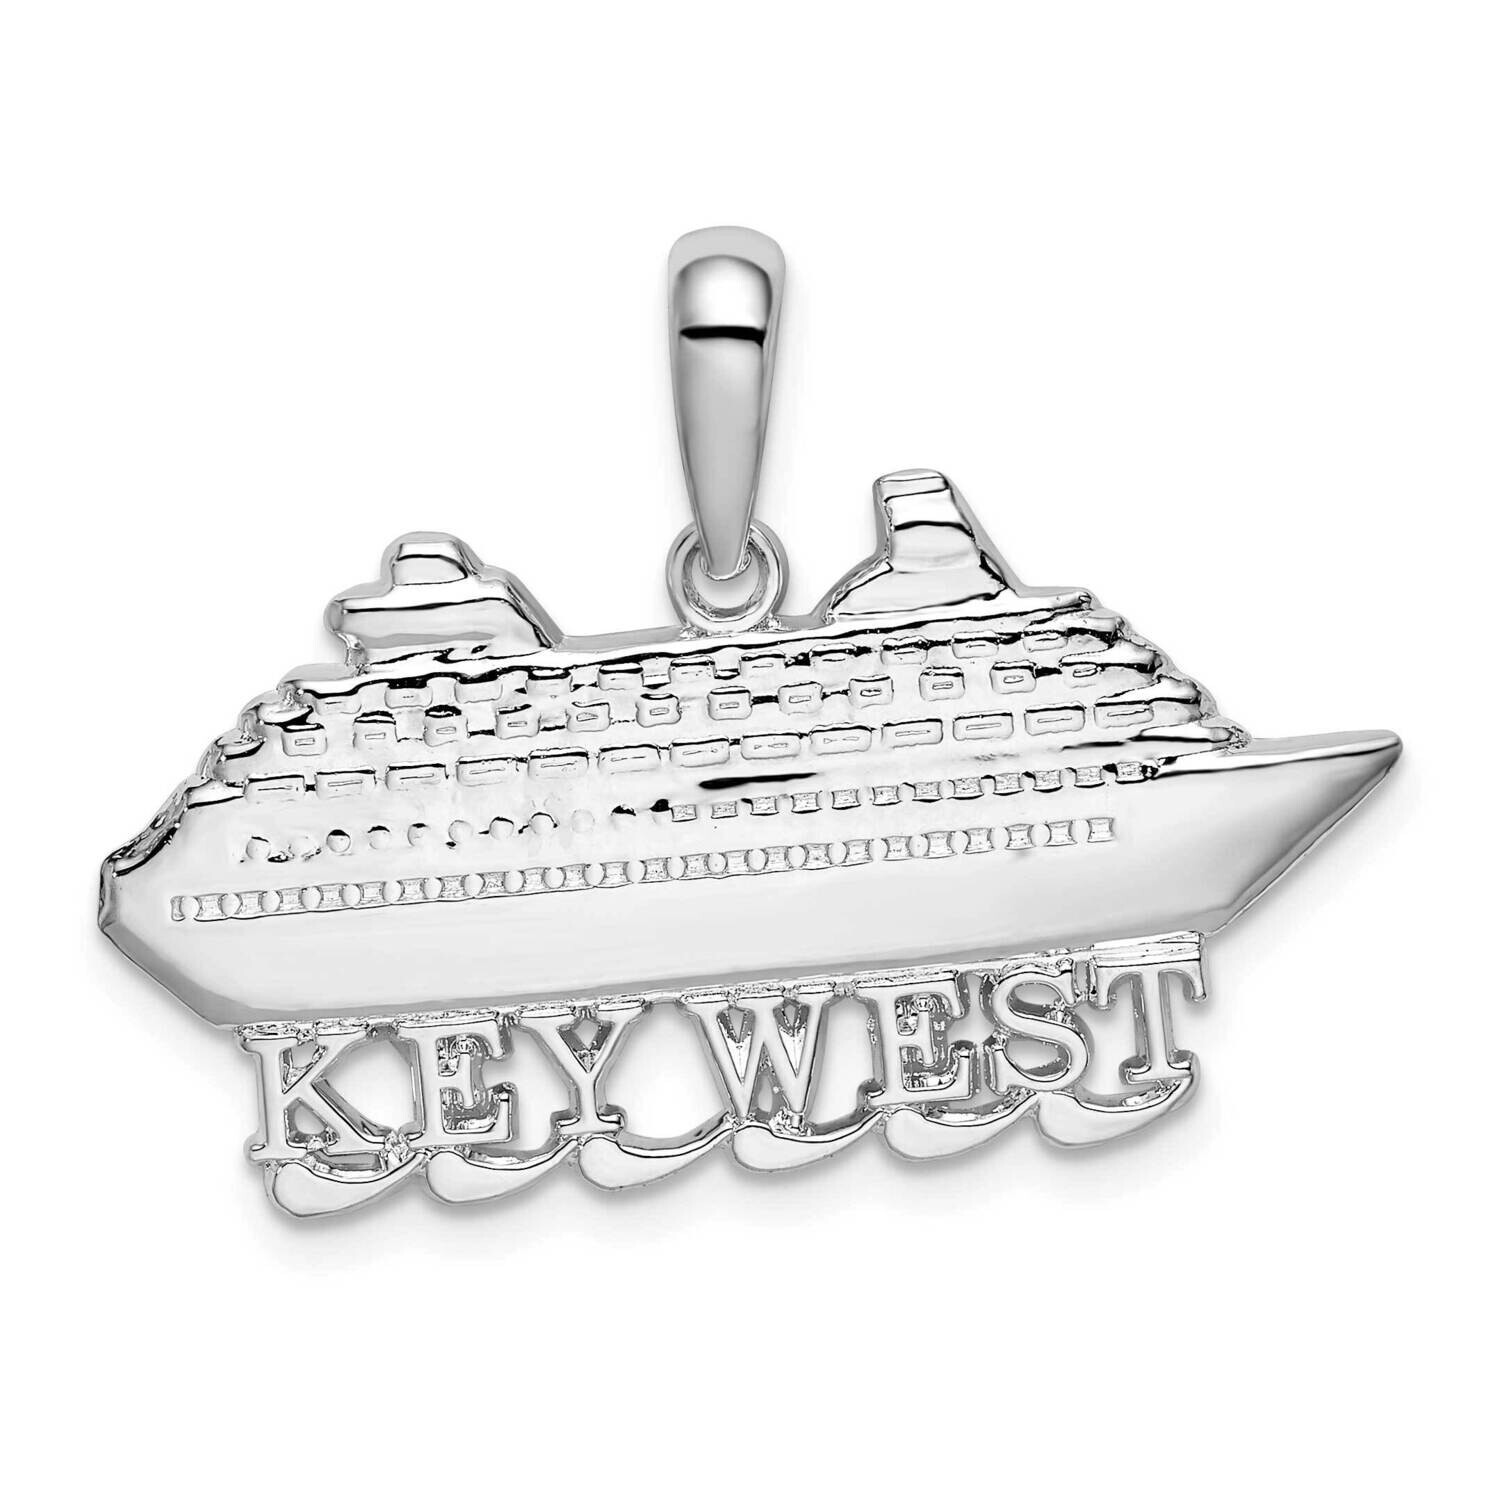 Key West Cruise Ship Pendant Sterling Silver Polished QC9925